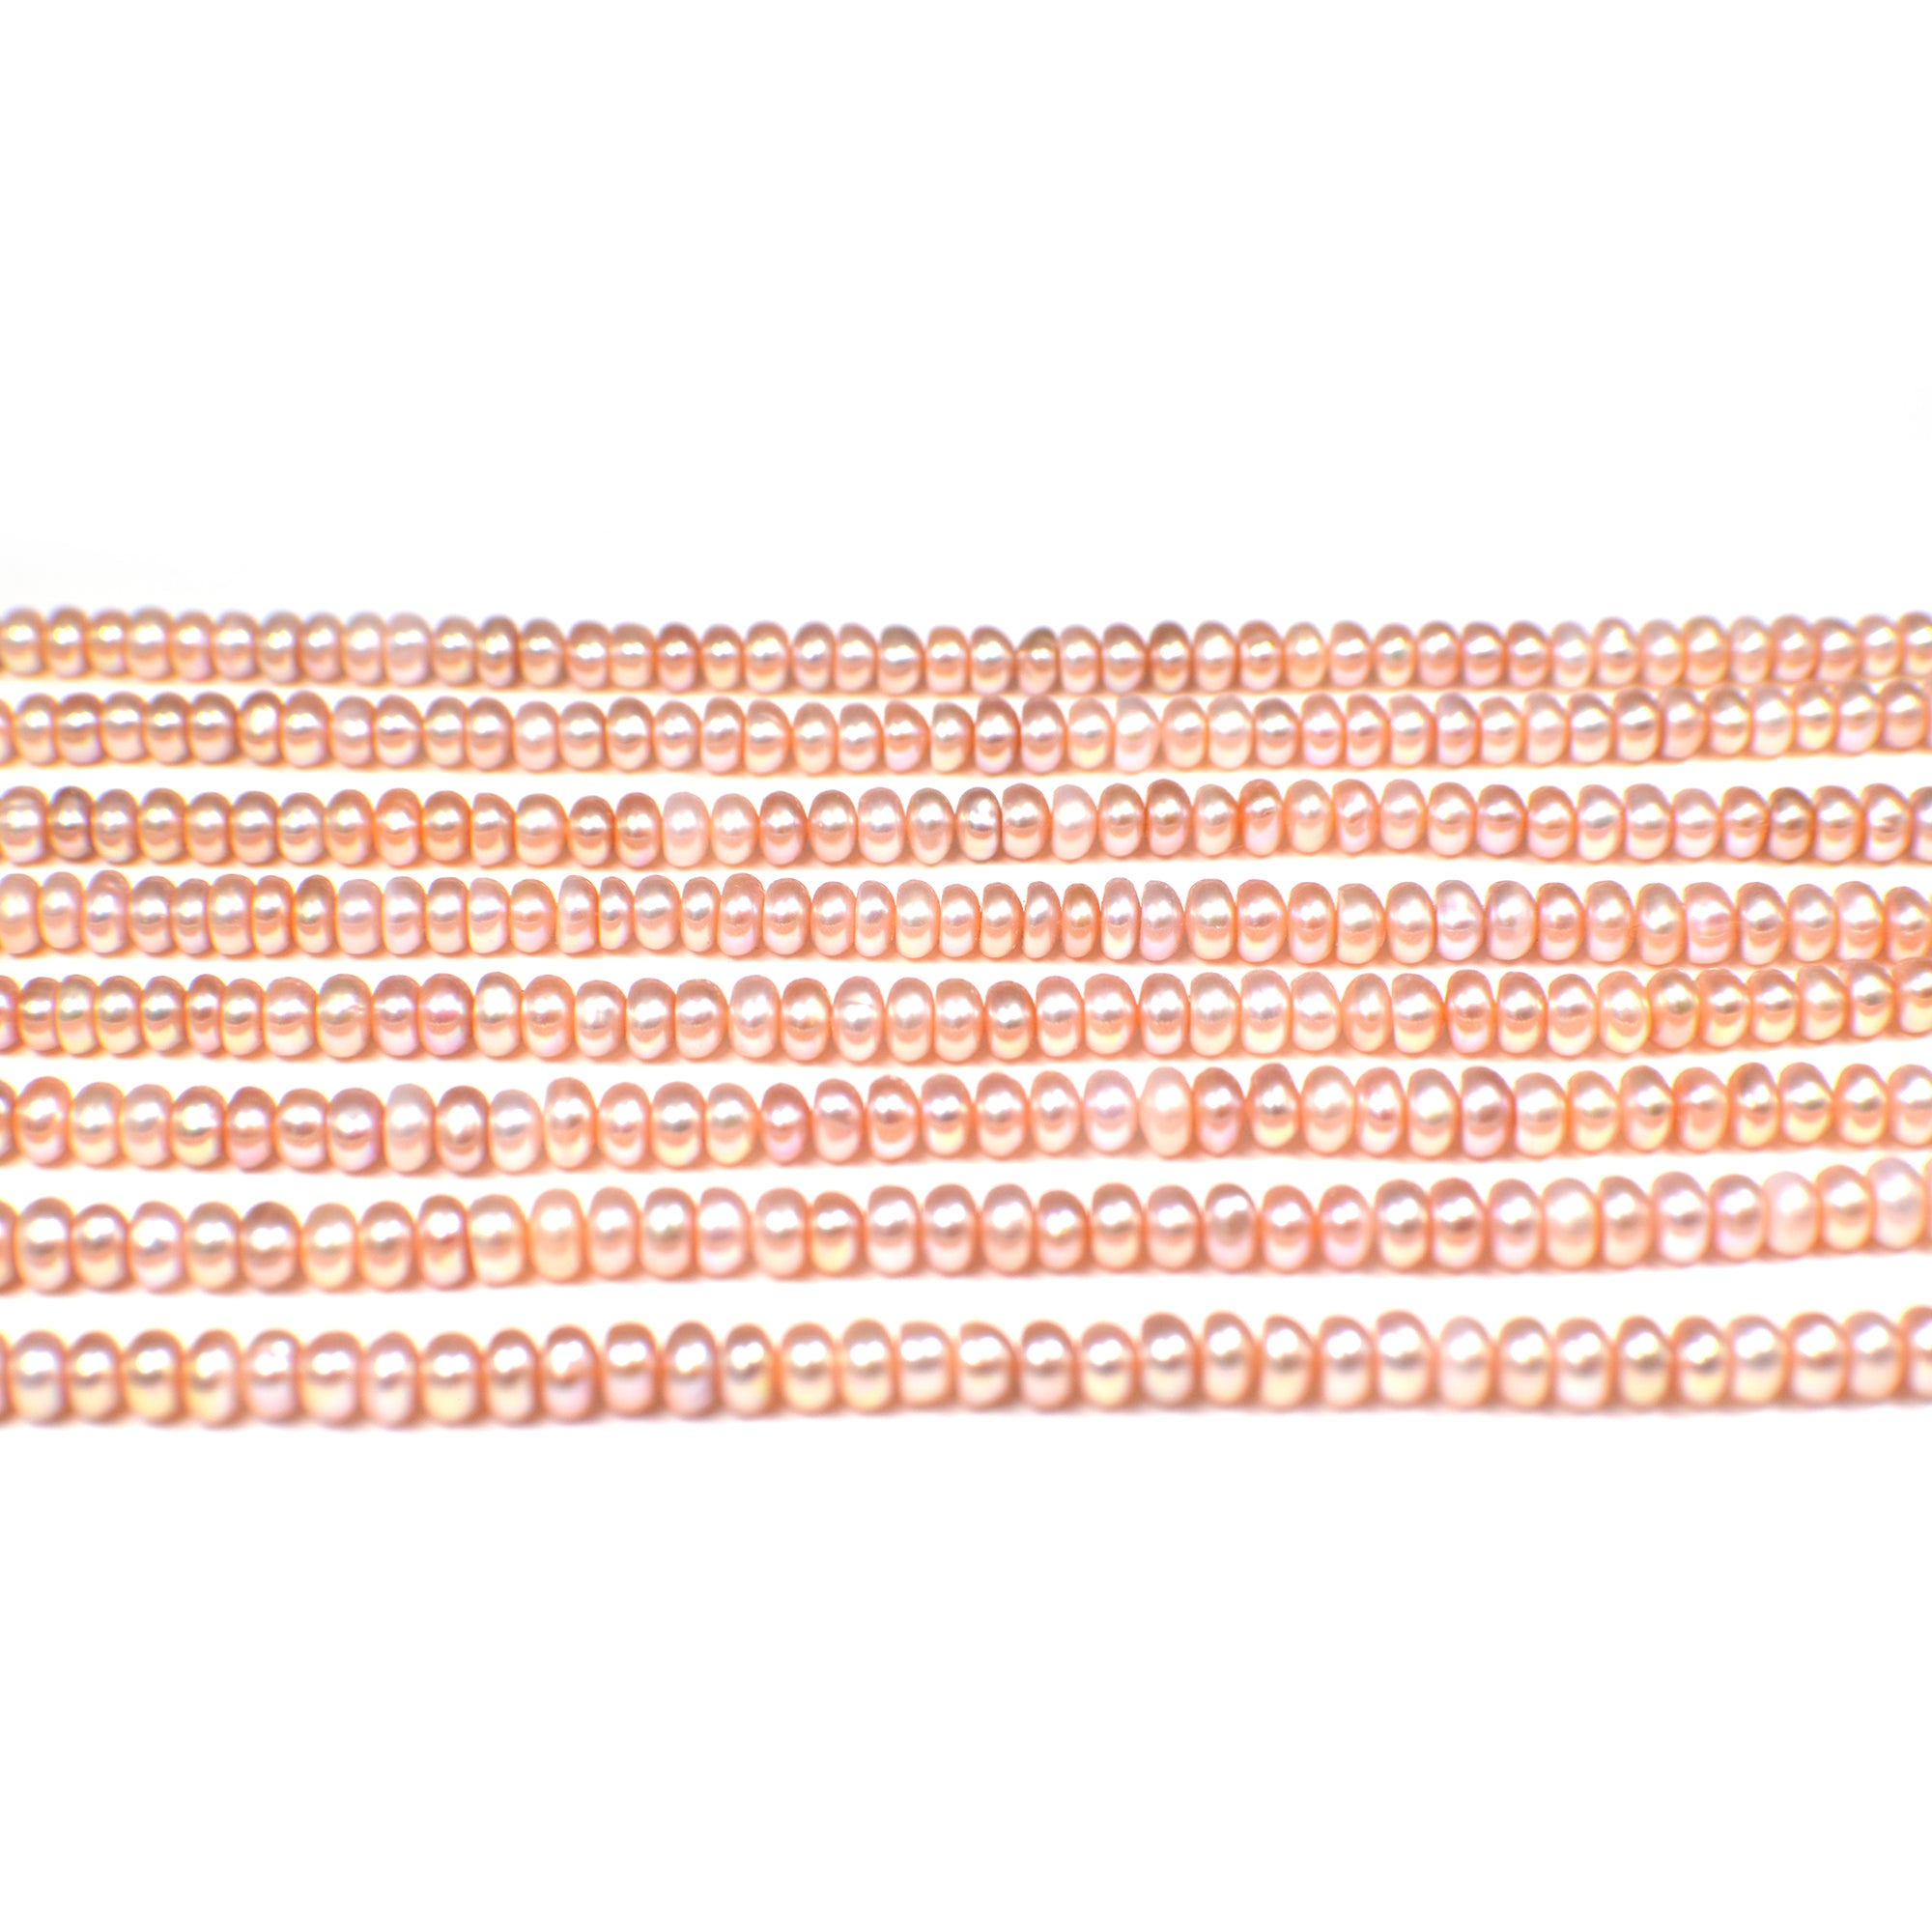 4 - 5 MM Pink Peach Button / Rondelle Freshwater Pearls Beads